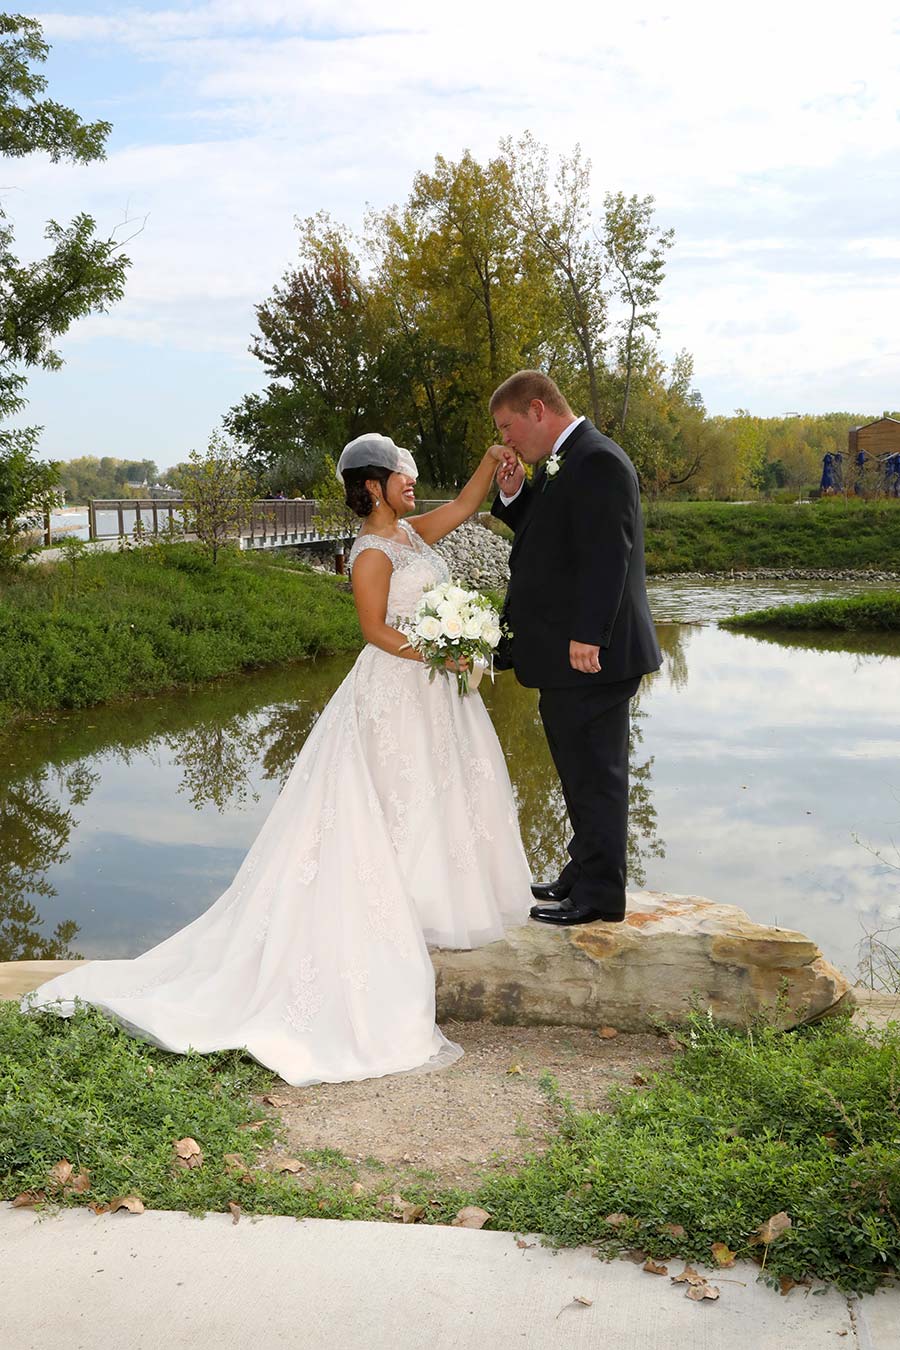 the groom give the bride a kiss on the hand while the couple stands on a large rock near the shores of the Maumee River